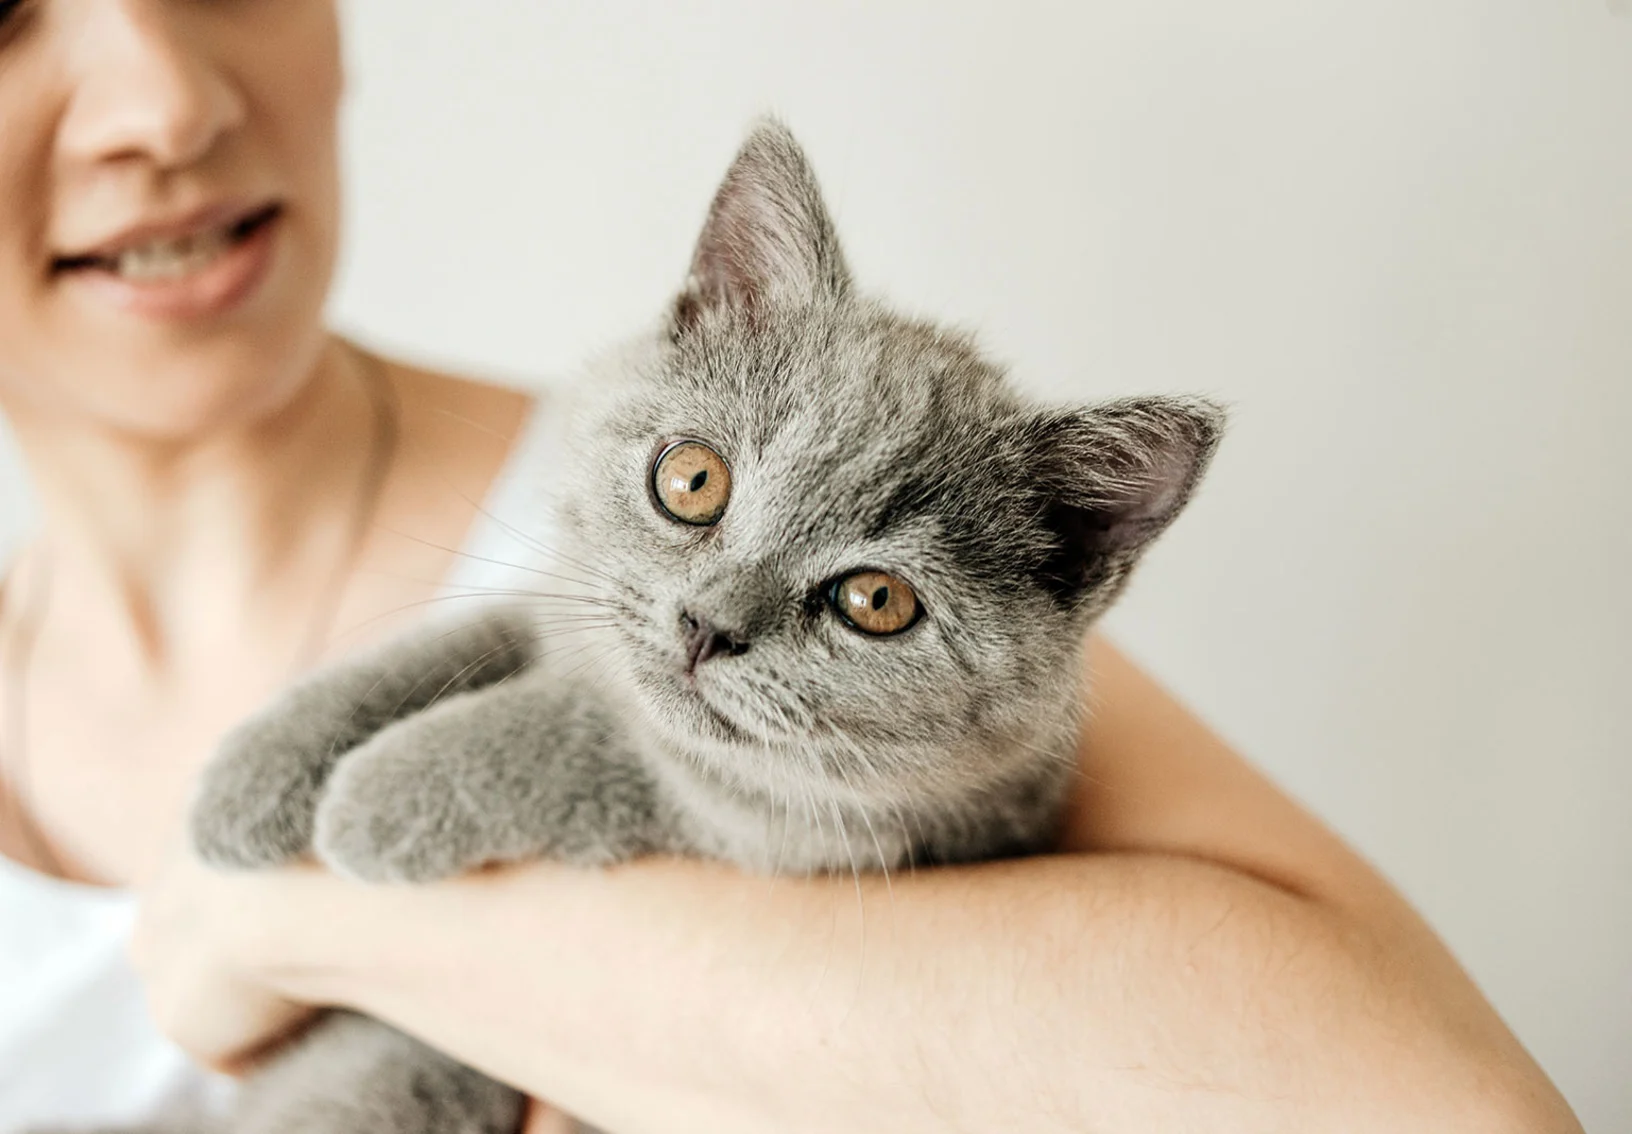 Woman indoors holding a gray cat in her arms